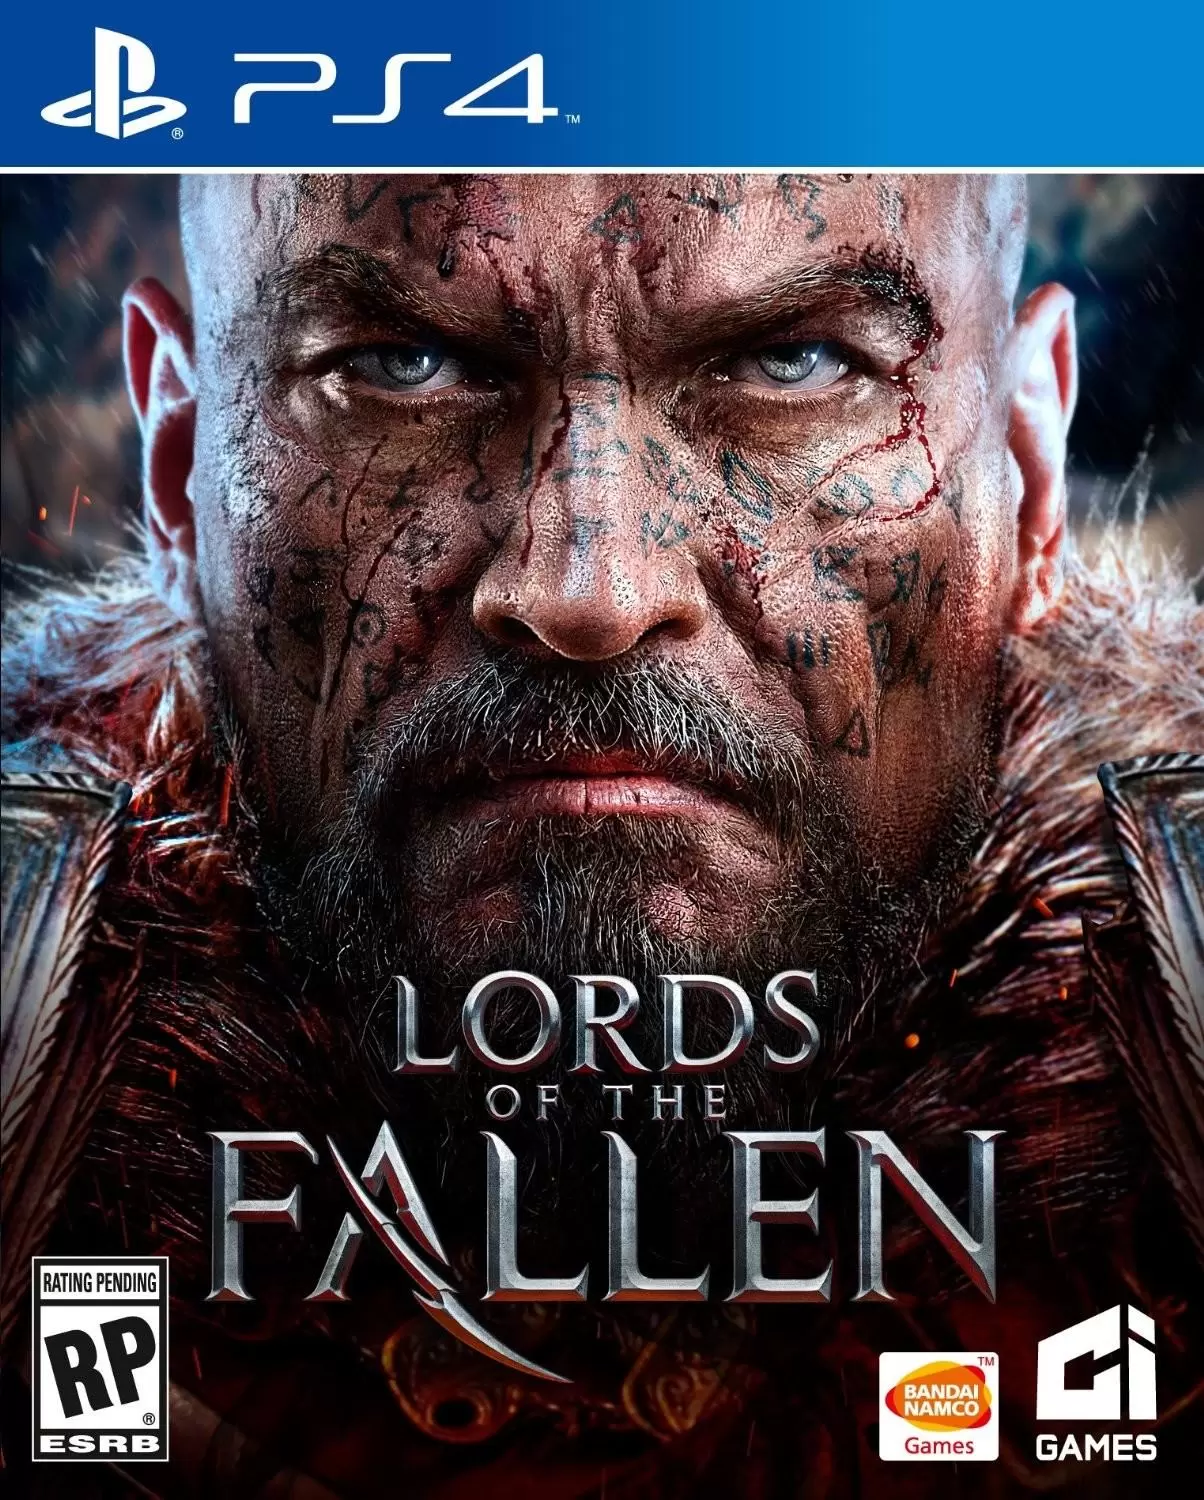 PS4 Games - Lords of the Fallen